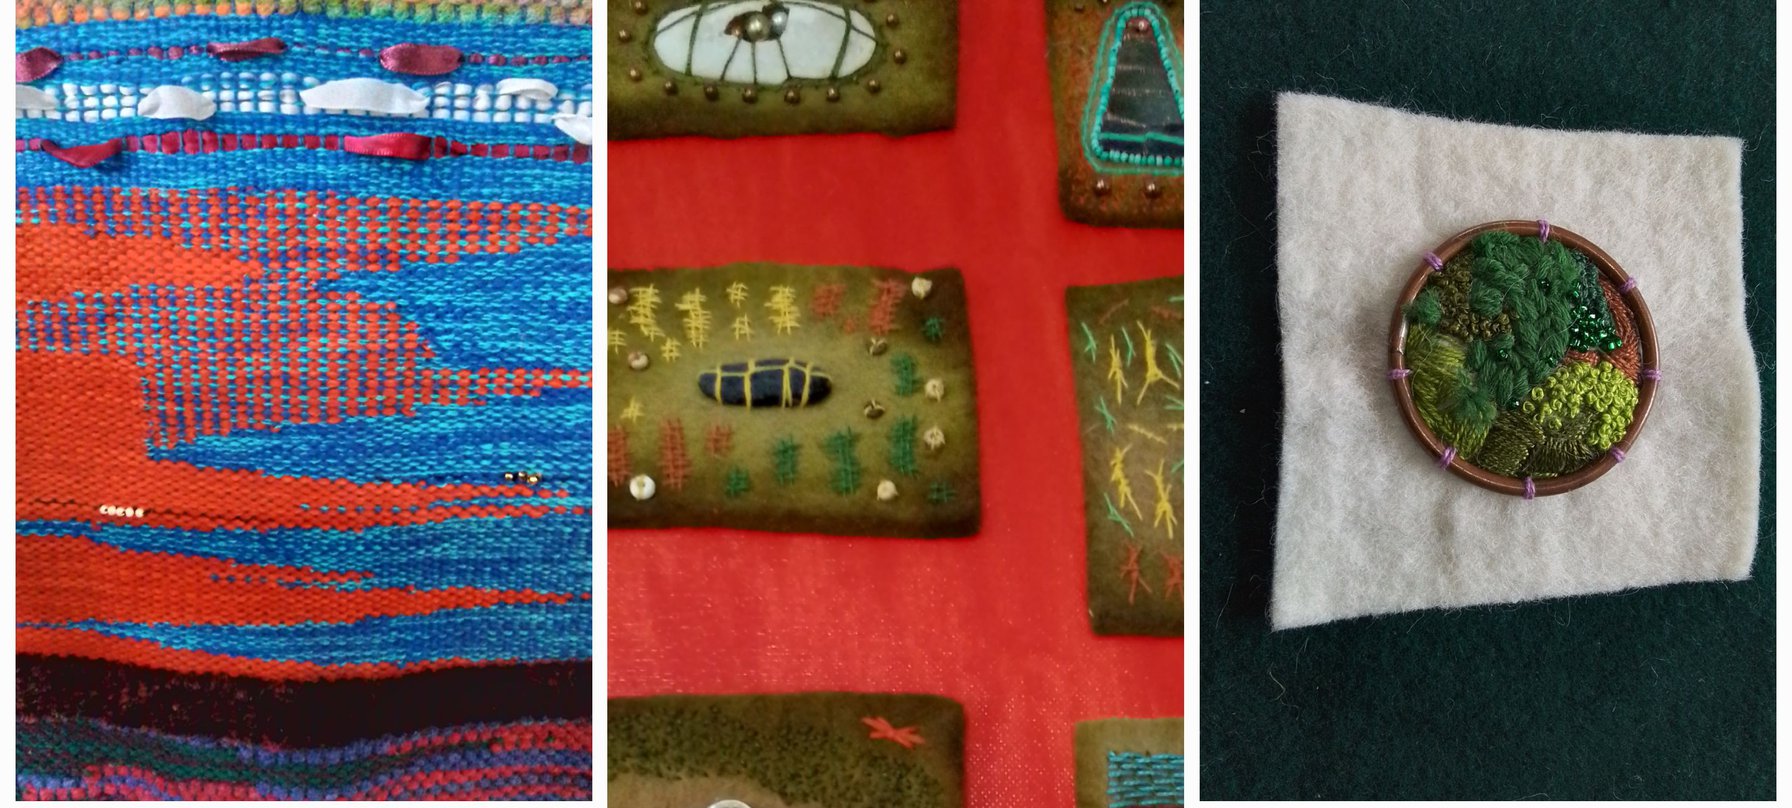 A grid photo of multiple wokrs made by Renate van Riet. The variety of works feature woven and felt creations depicting natural landscapes. Image Renate van Riet.